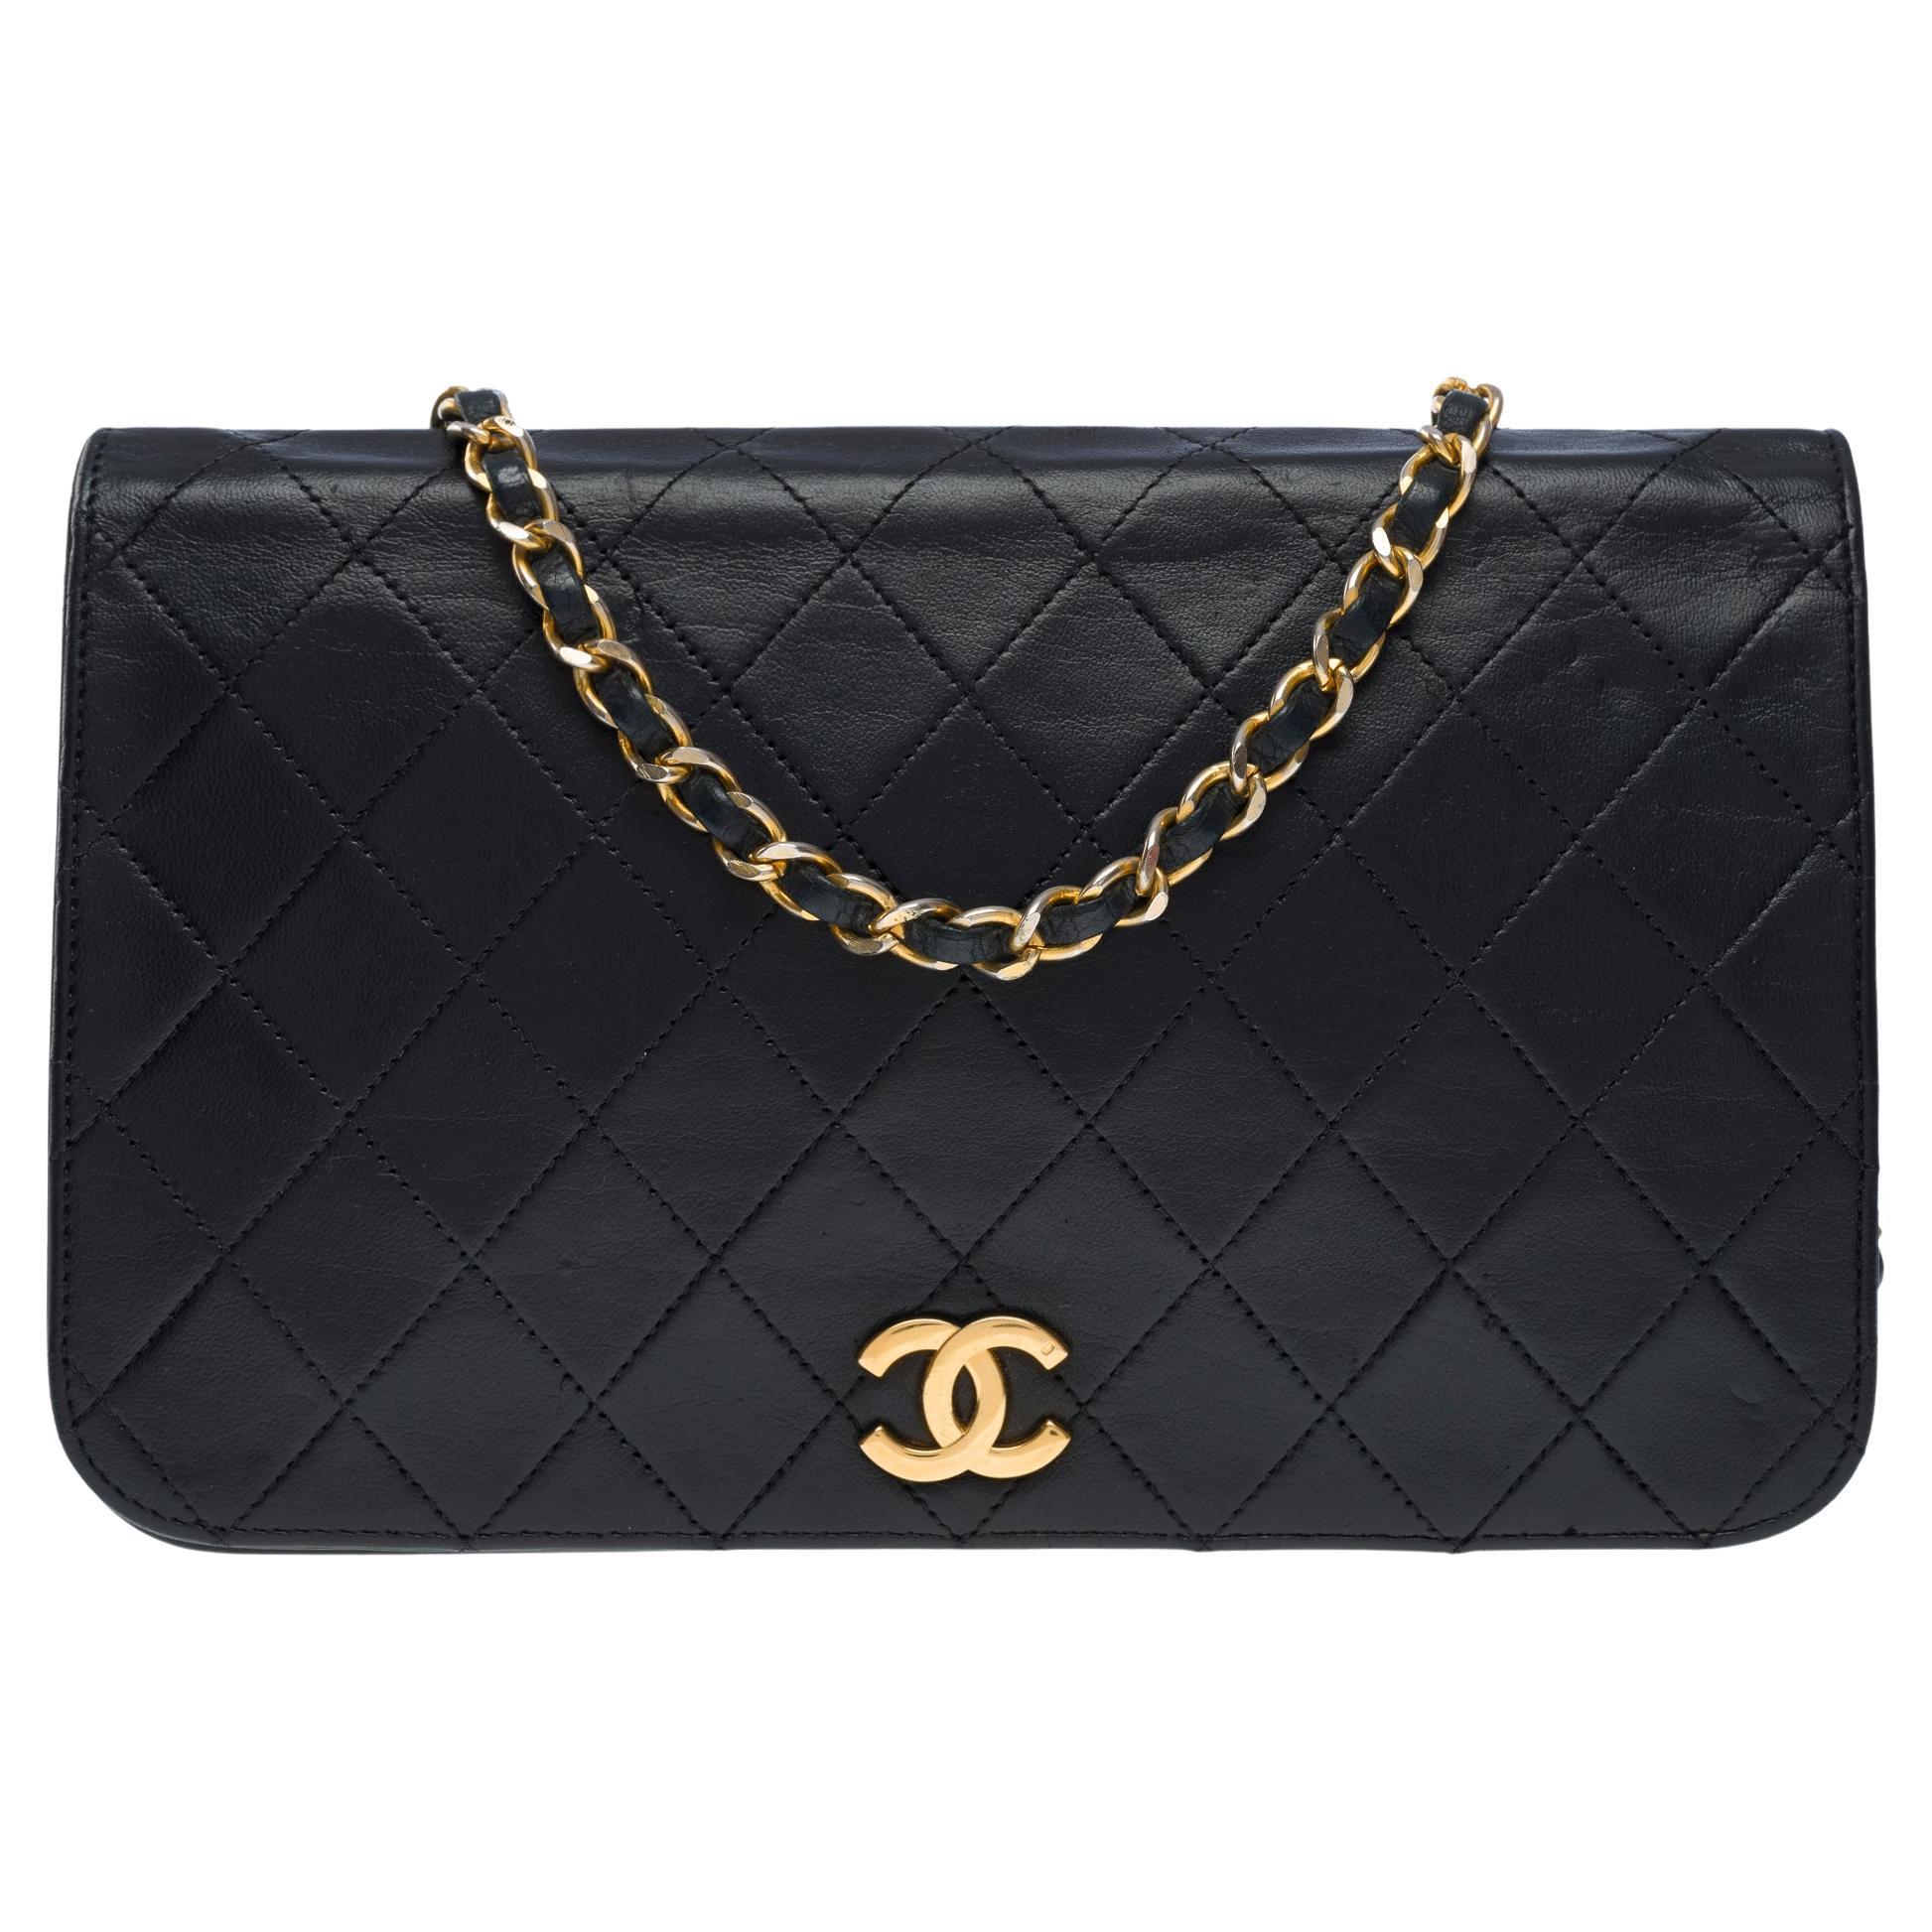 Chanel Classic Full Flap shoulder bag in black quilted lambskin